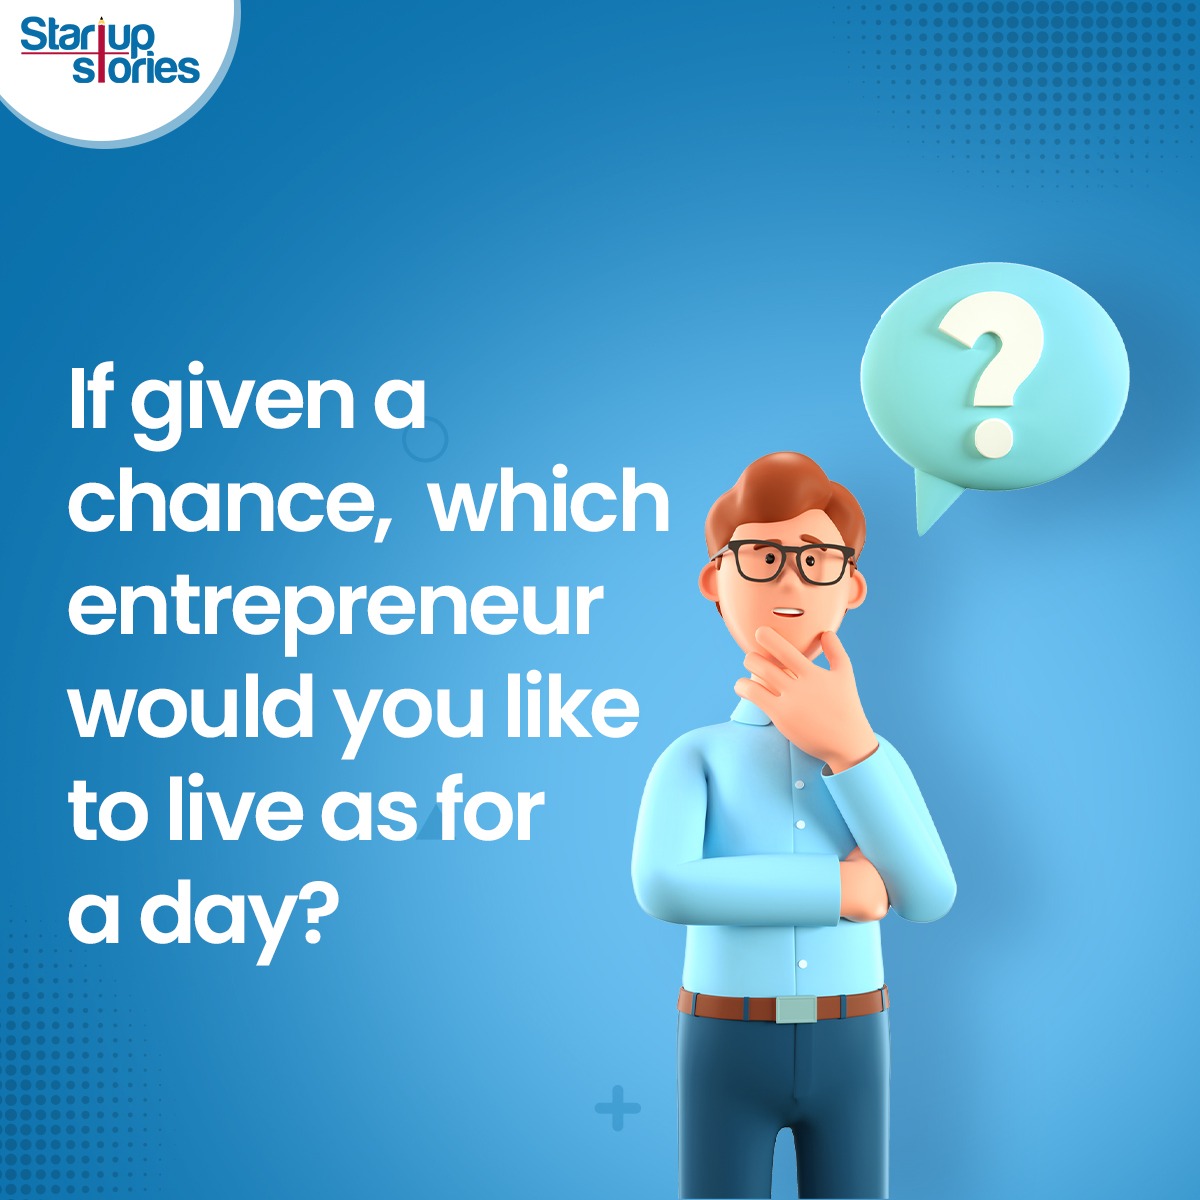 Let us know in comments below.

#Startups #InteractivePost #StartupStories #SS #Business #Companies #Entrepreneur #Founders #CEOs